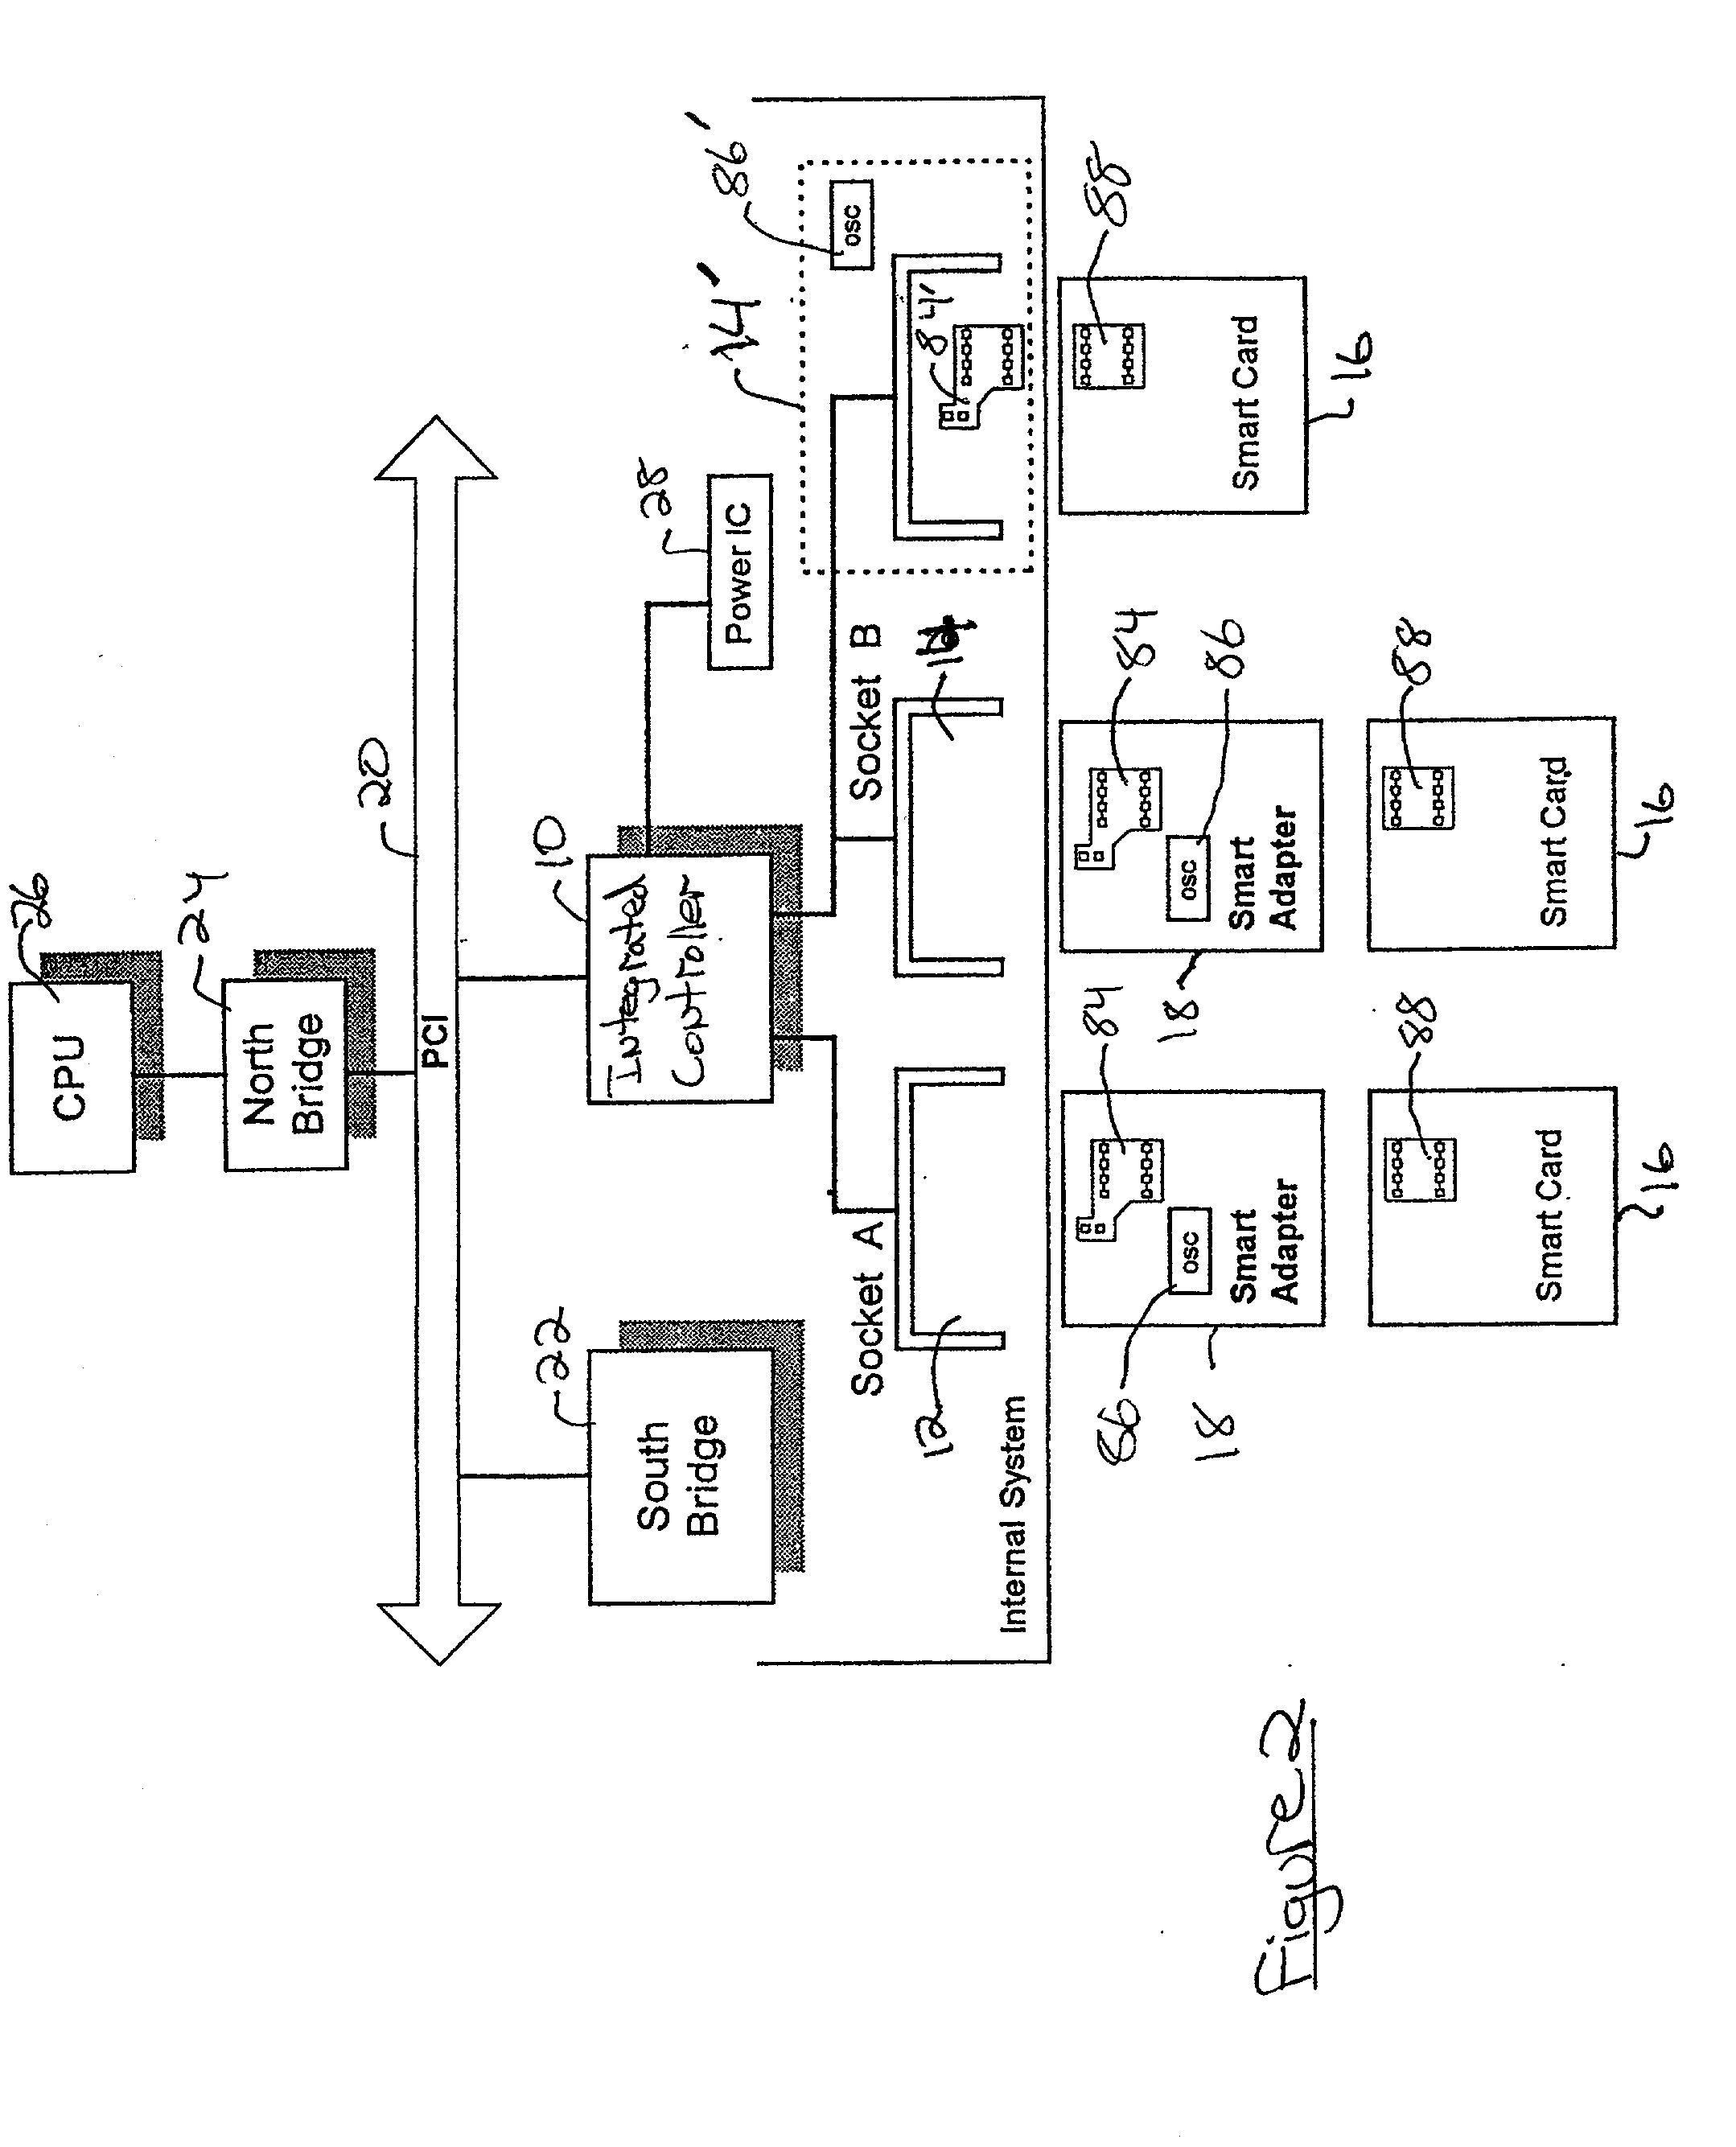 Integrated PC Card host controller for the detection and operation of a plurality of expansion cards